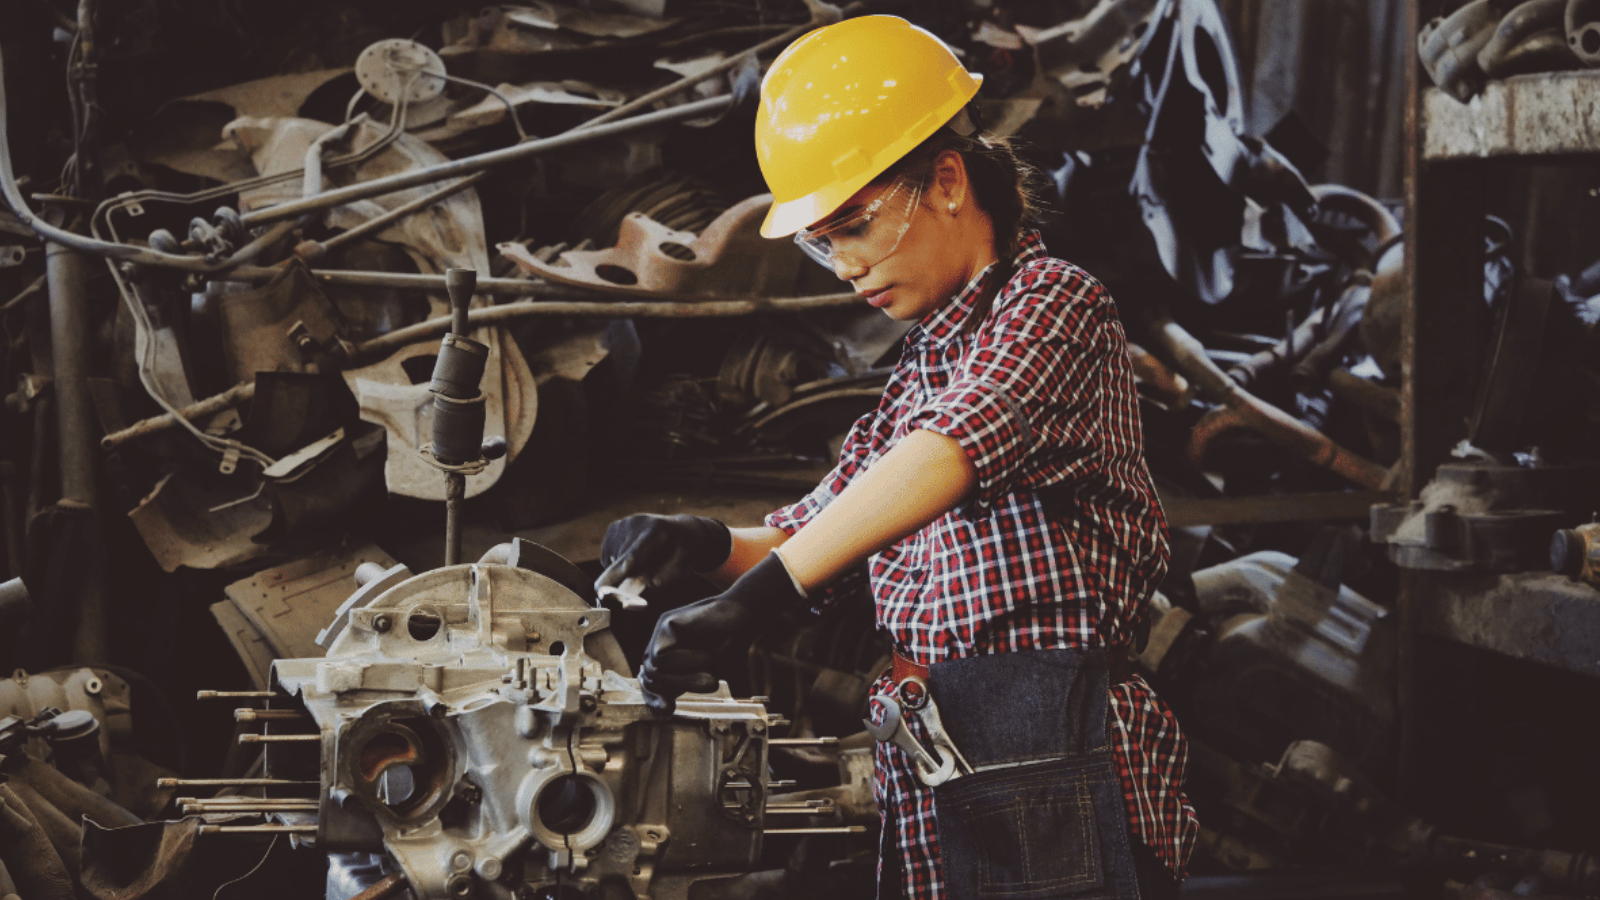 A woman in a hard hat working on an engine.